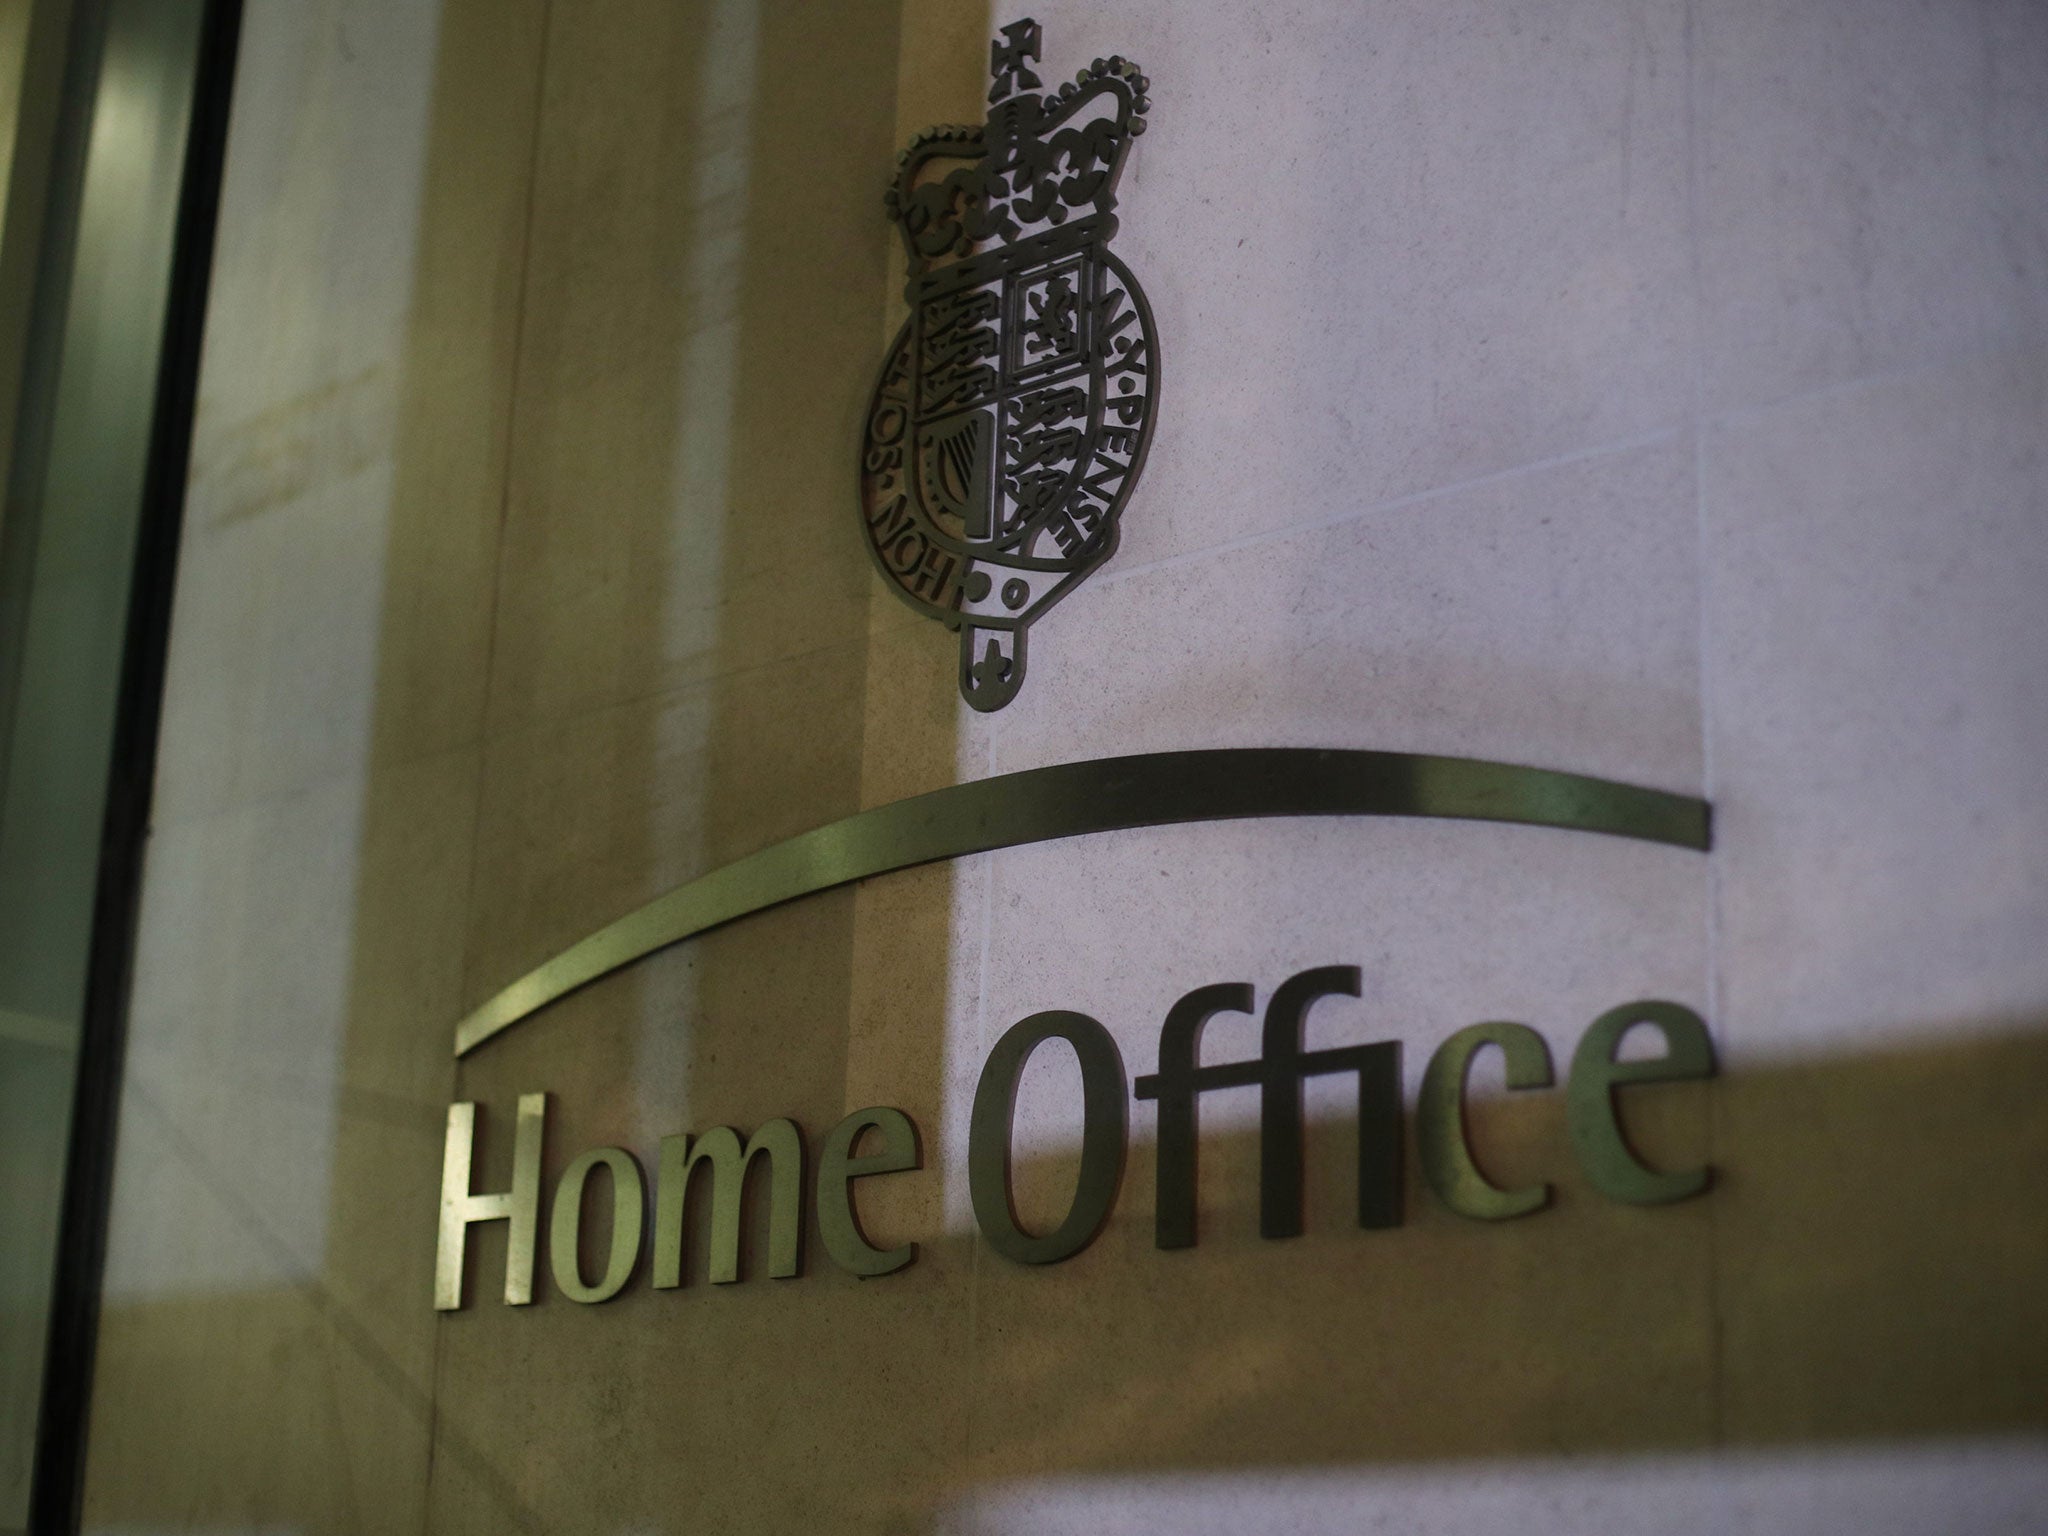 'Ministers need to consider whether the Home Office is the right permanent home for a migration policy'